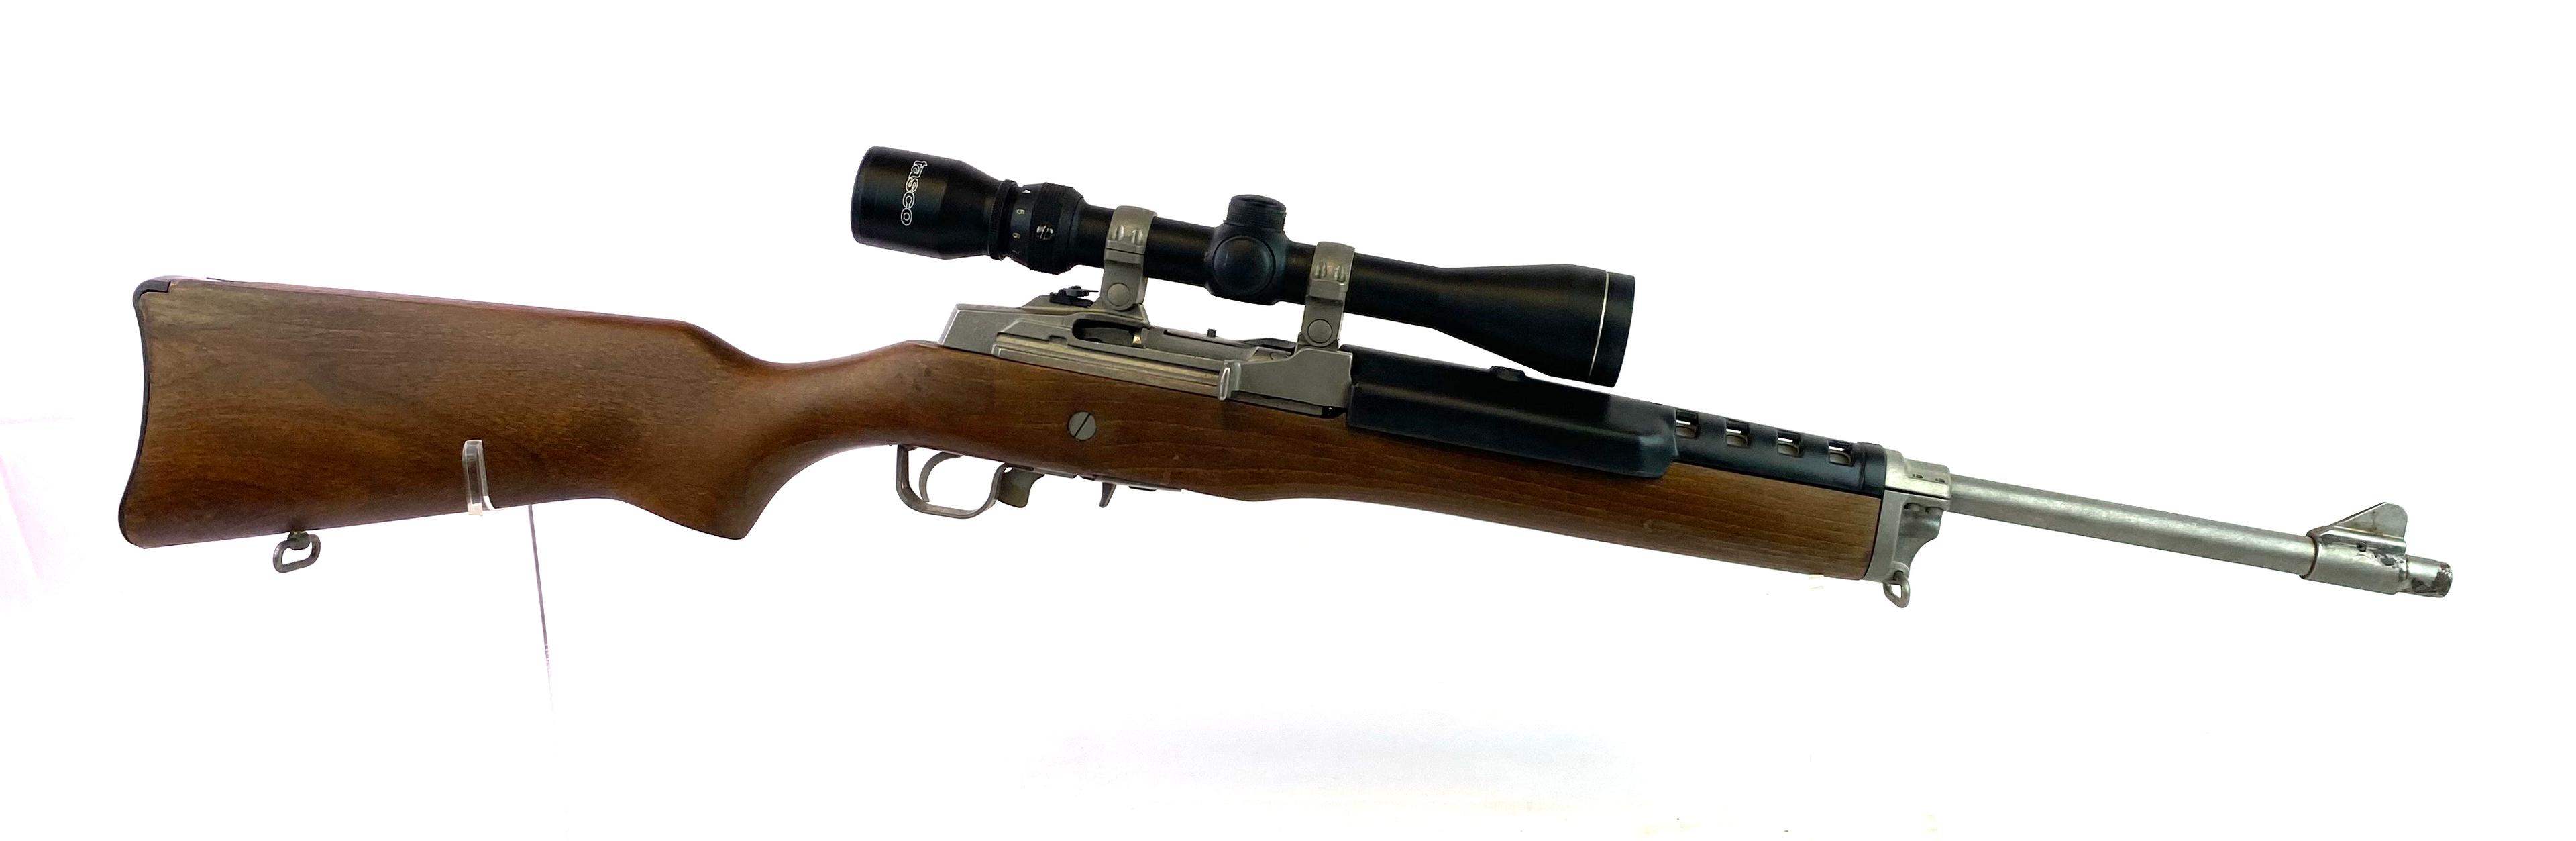 2002 Ruger Mini Thirty 7.62x39 Semi-Automatic Rifle with Scope and 5rd. Magazine